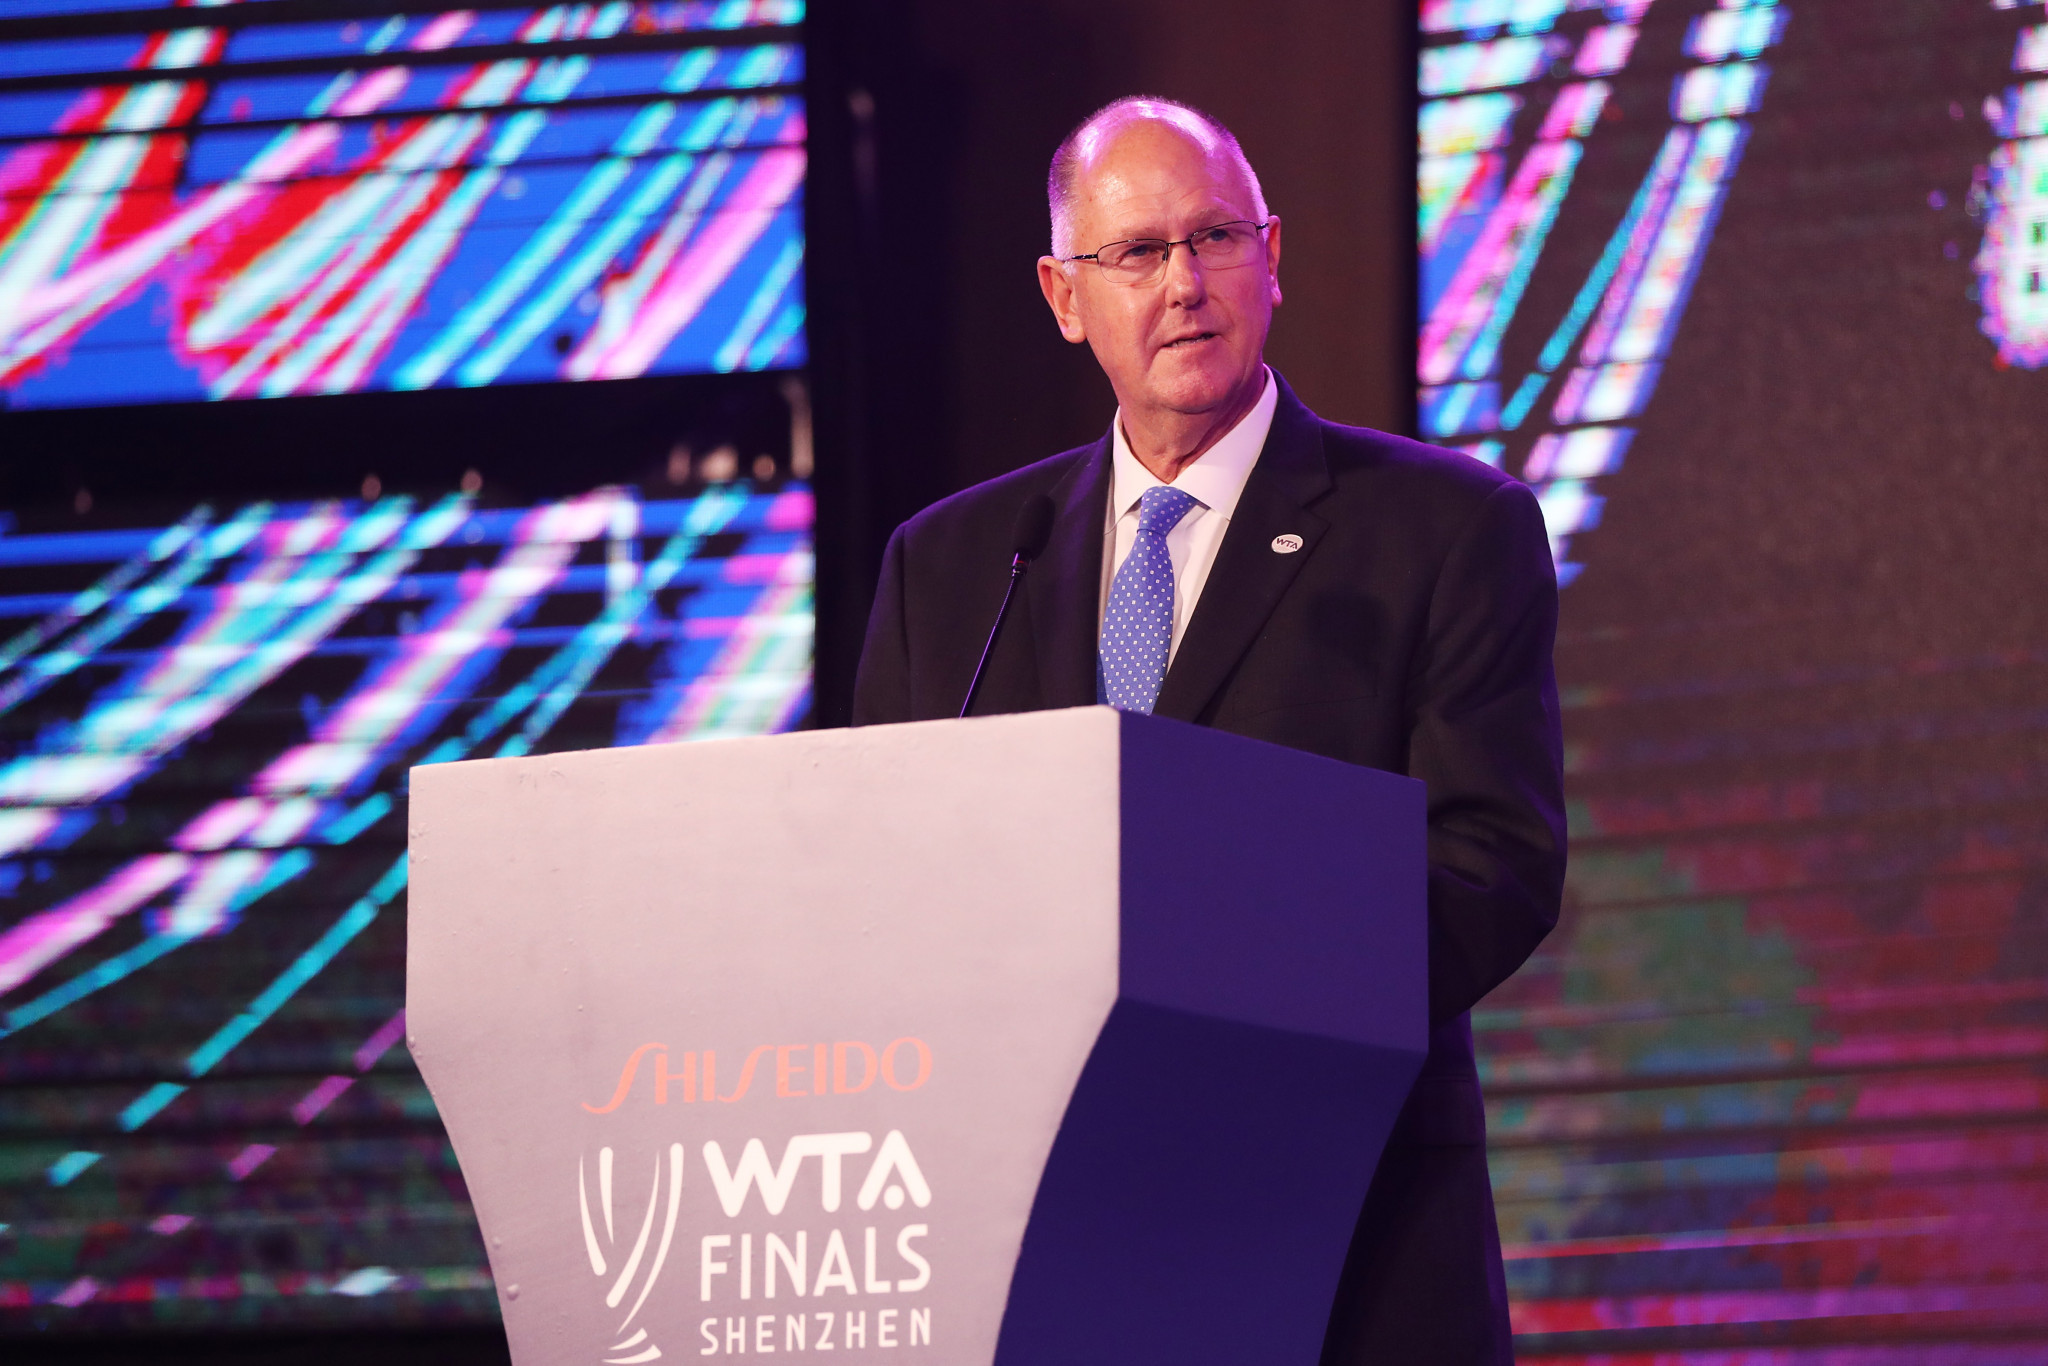 WTA chief executive and chairman Steve Simon said the organisation's relationship with China is 